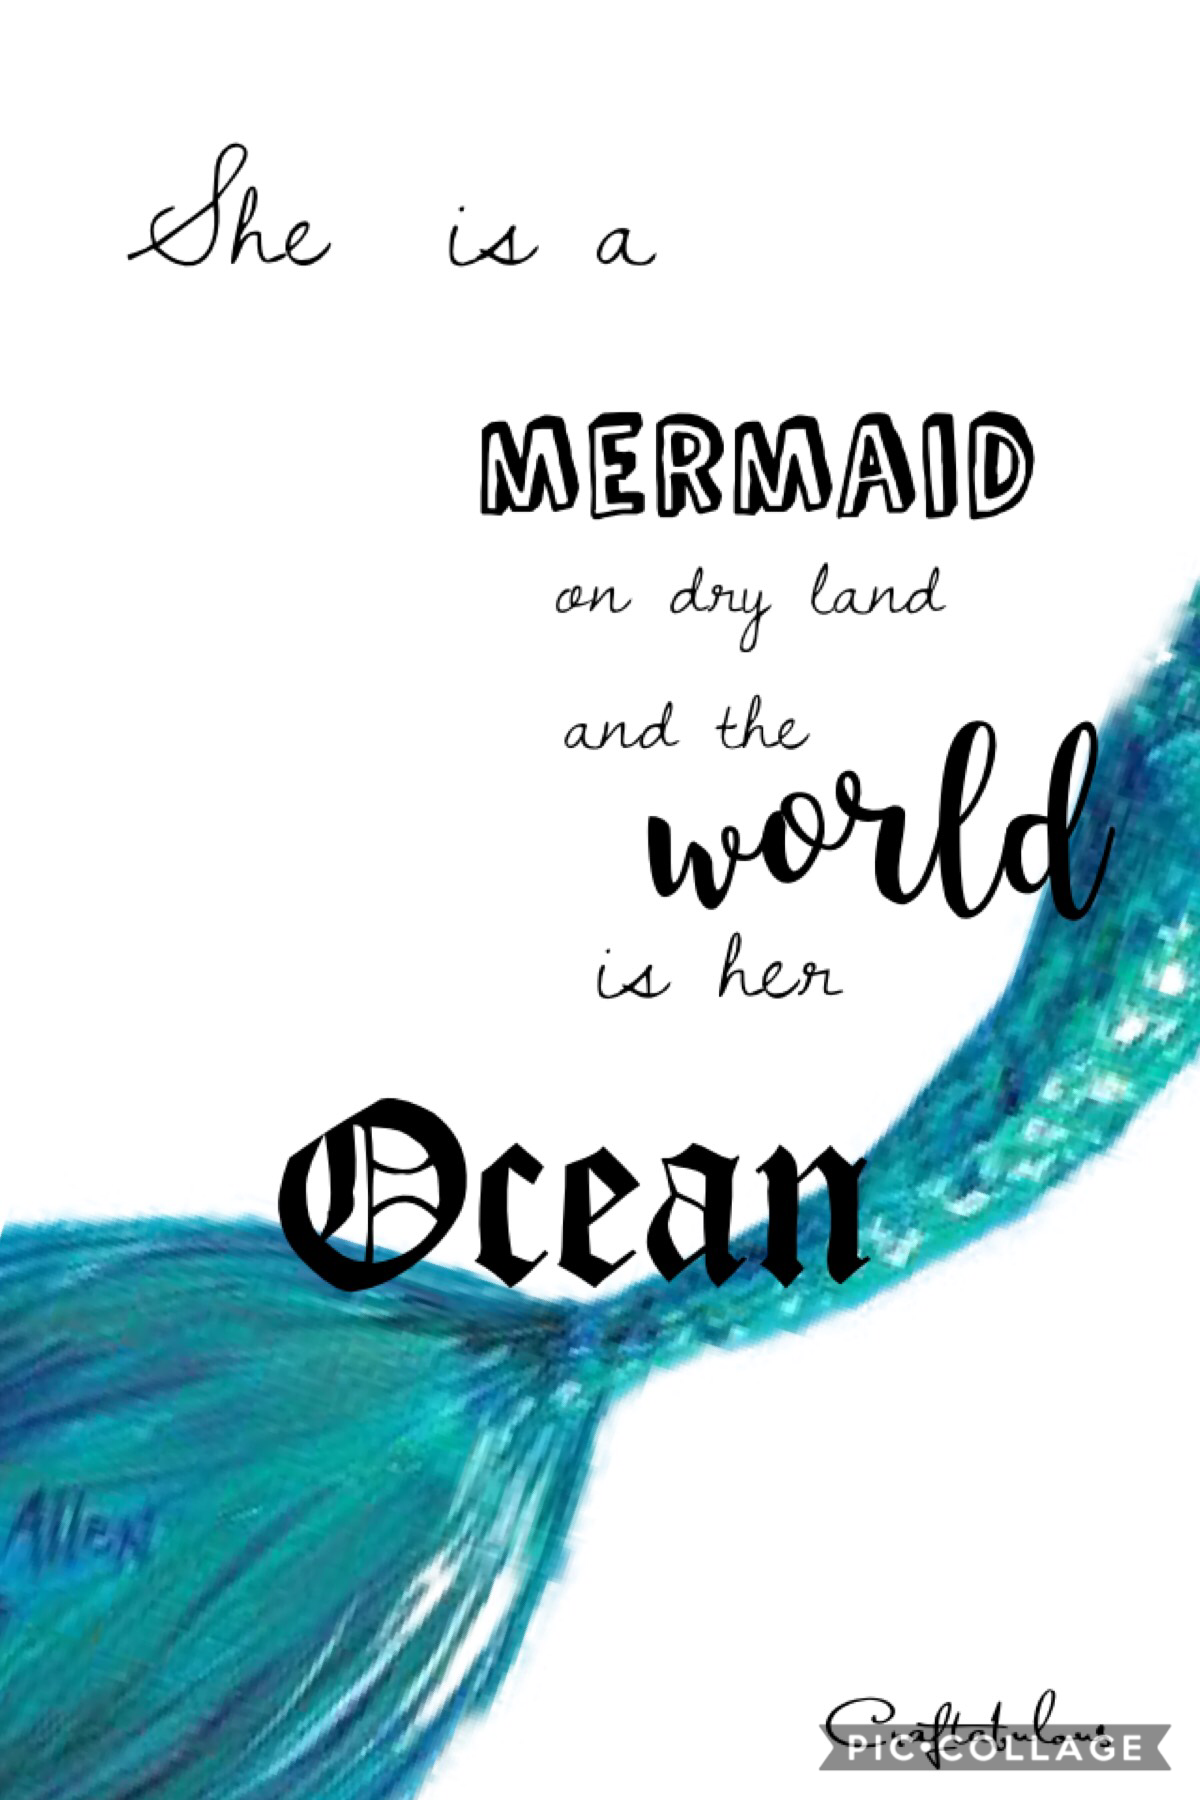 I might just do a few mermaid collages just because 